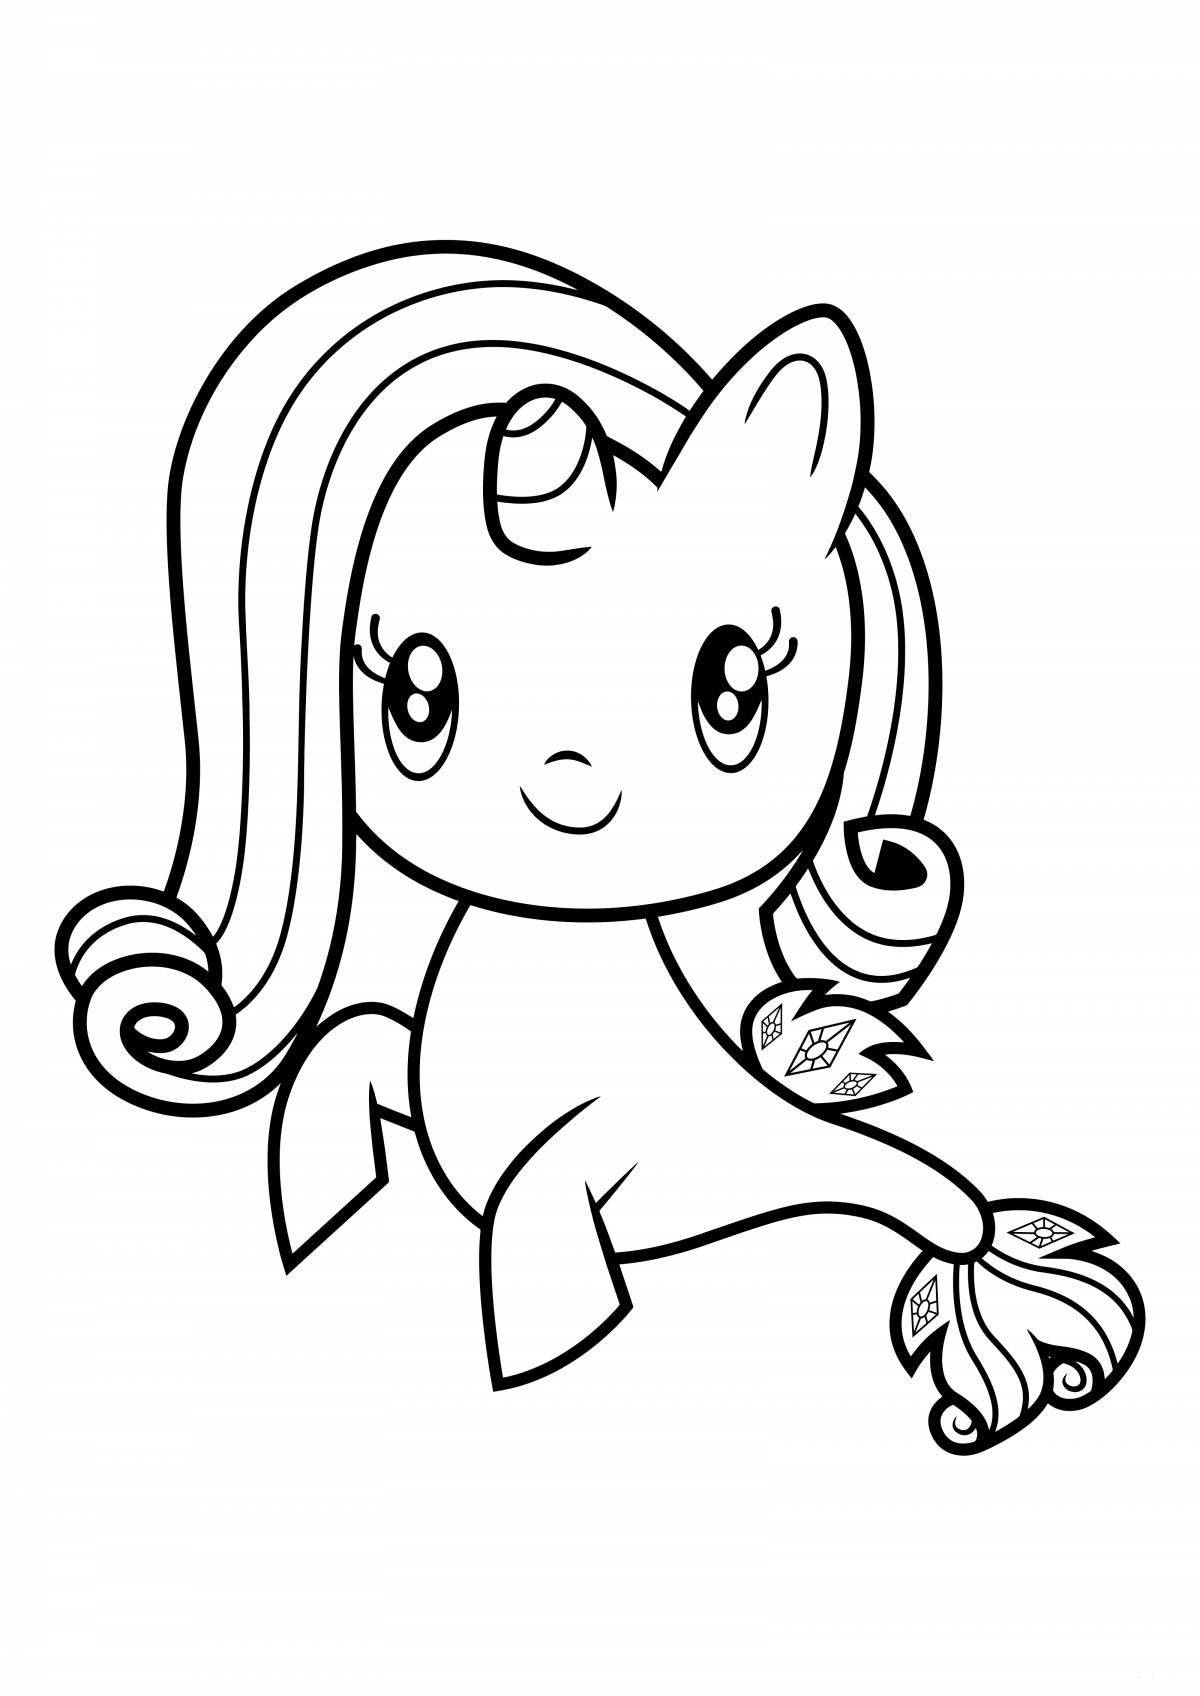 Coloring page exquisite cute pony